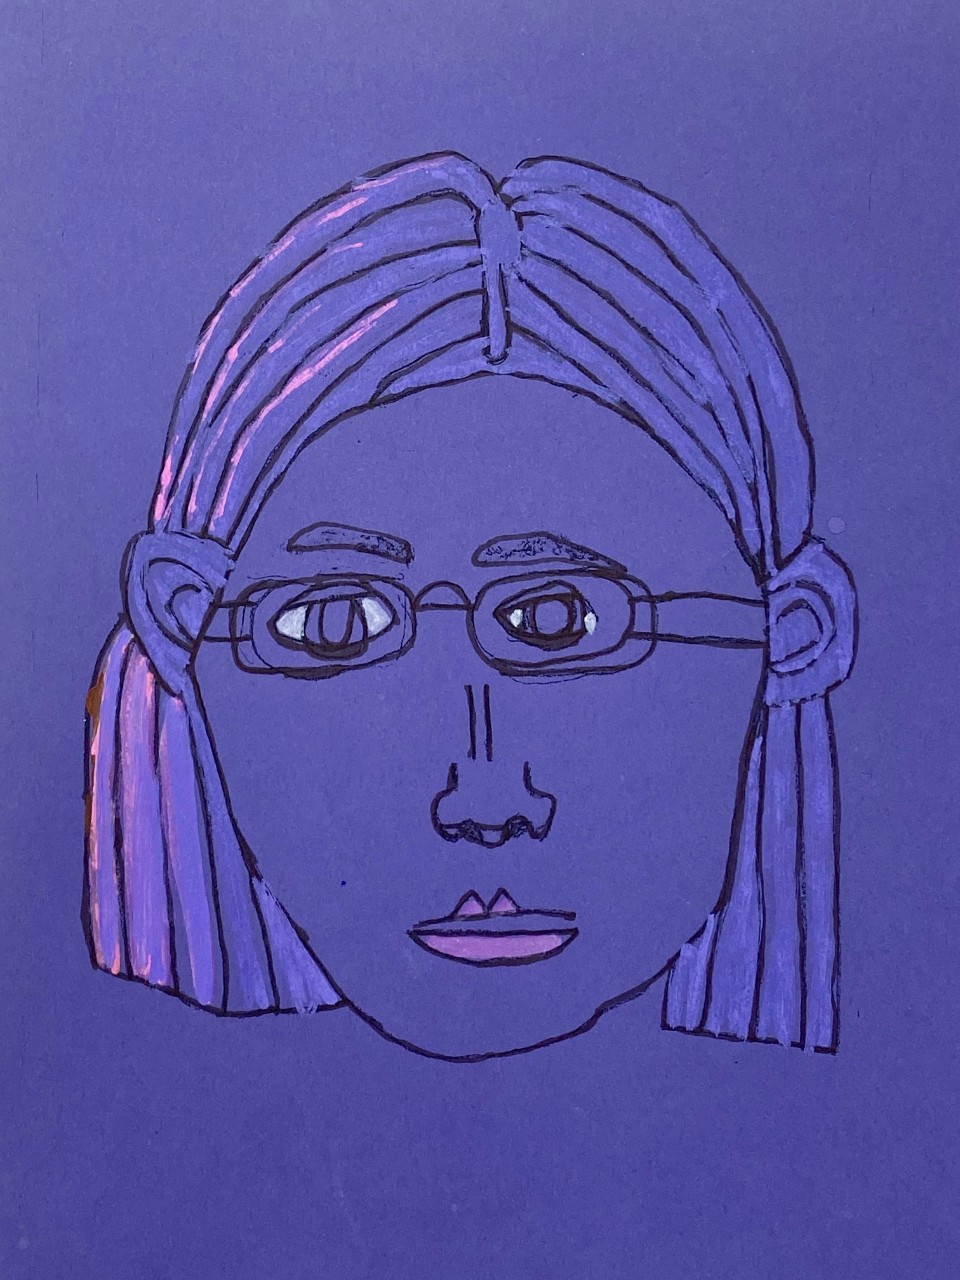  A simple, black line drawing shows a young woman’s face on a solid, violet-blue background. The hair is chin-length and straight, and she is wearing rectangular glasses. There are tints of pink and white color as highlights in her hair and on her lips, which are slightly parted. There is also color for the whites of her eyes. 